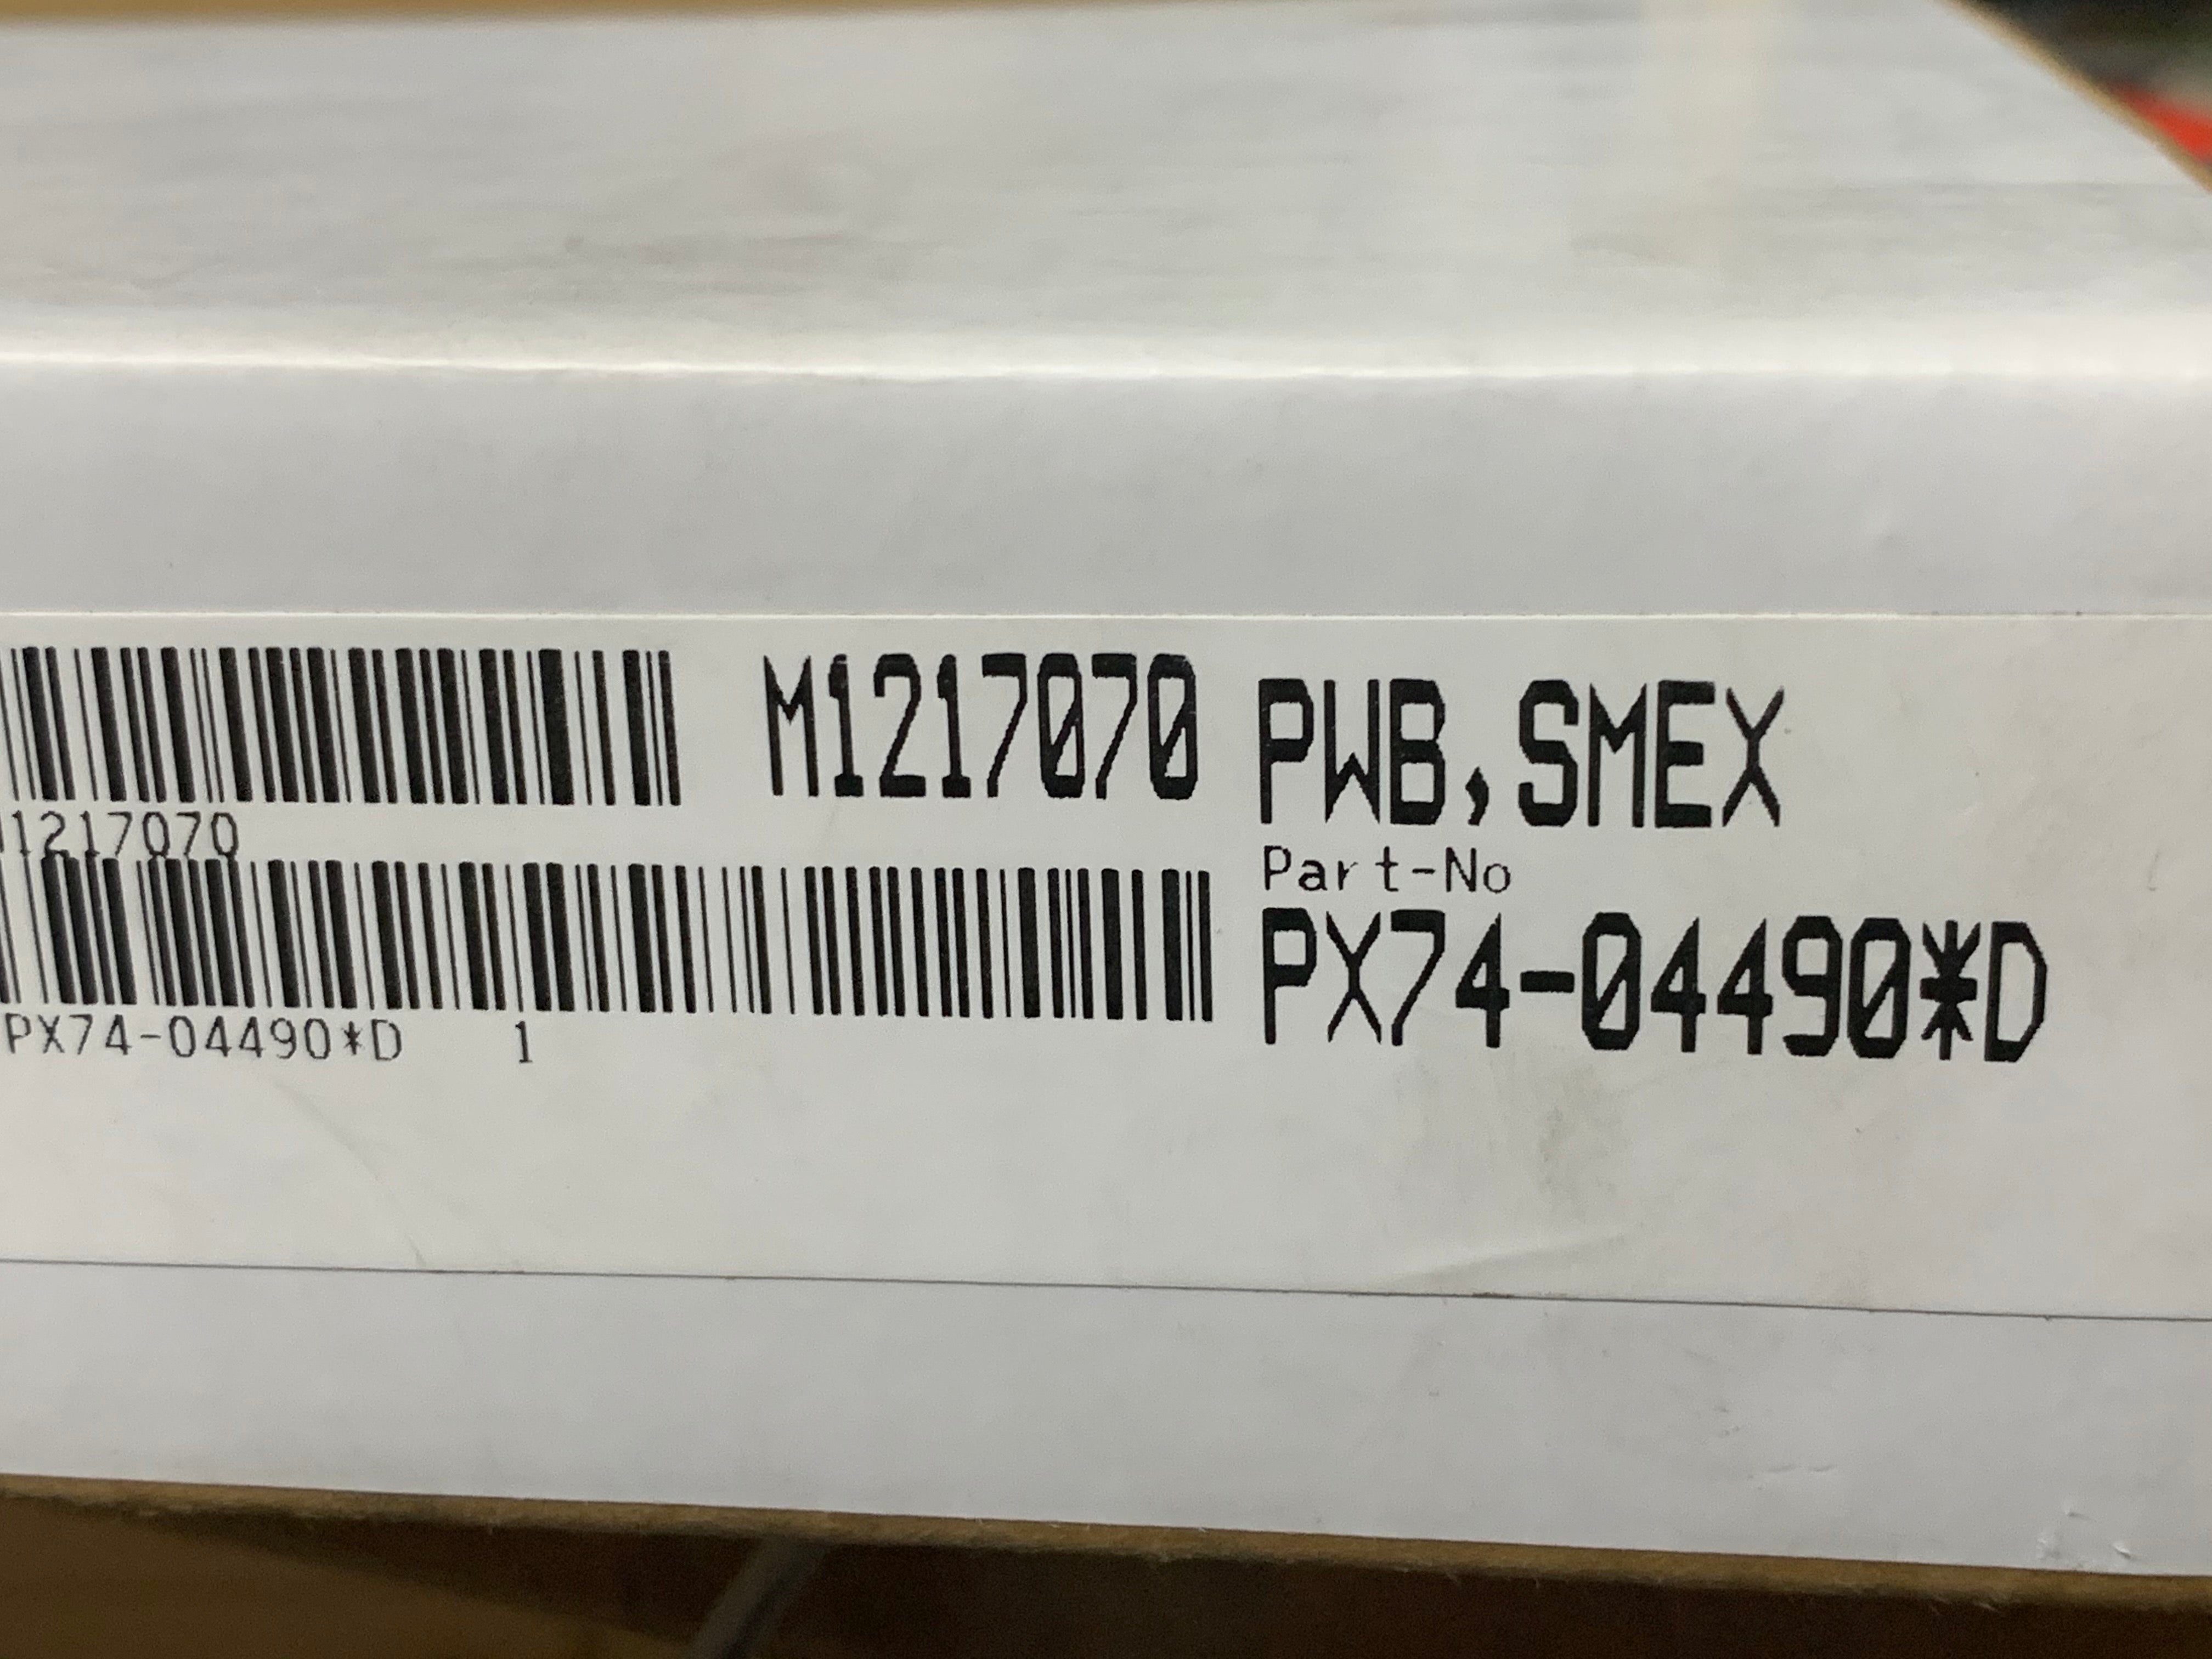 SSCONTX Board P/N Px74-08812-C TOSHIBA CANNON ALEXION 16 CT Scanner Pa